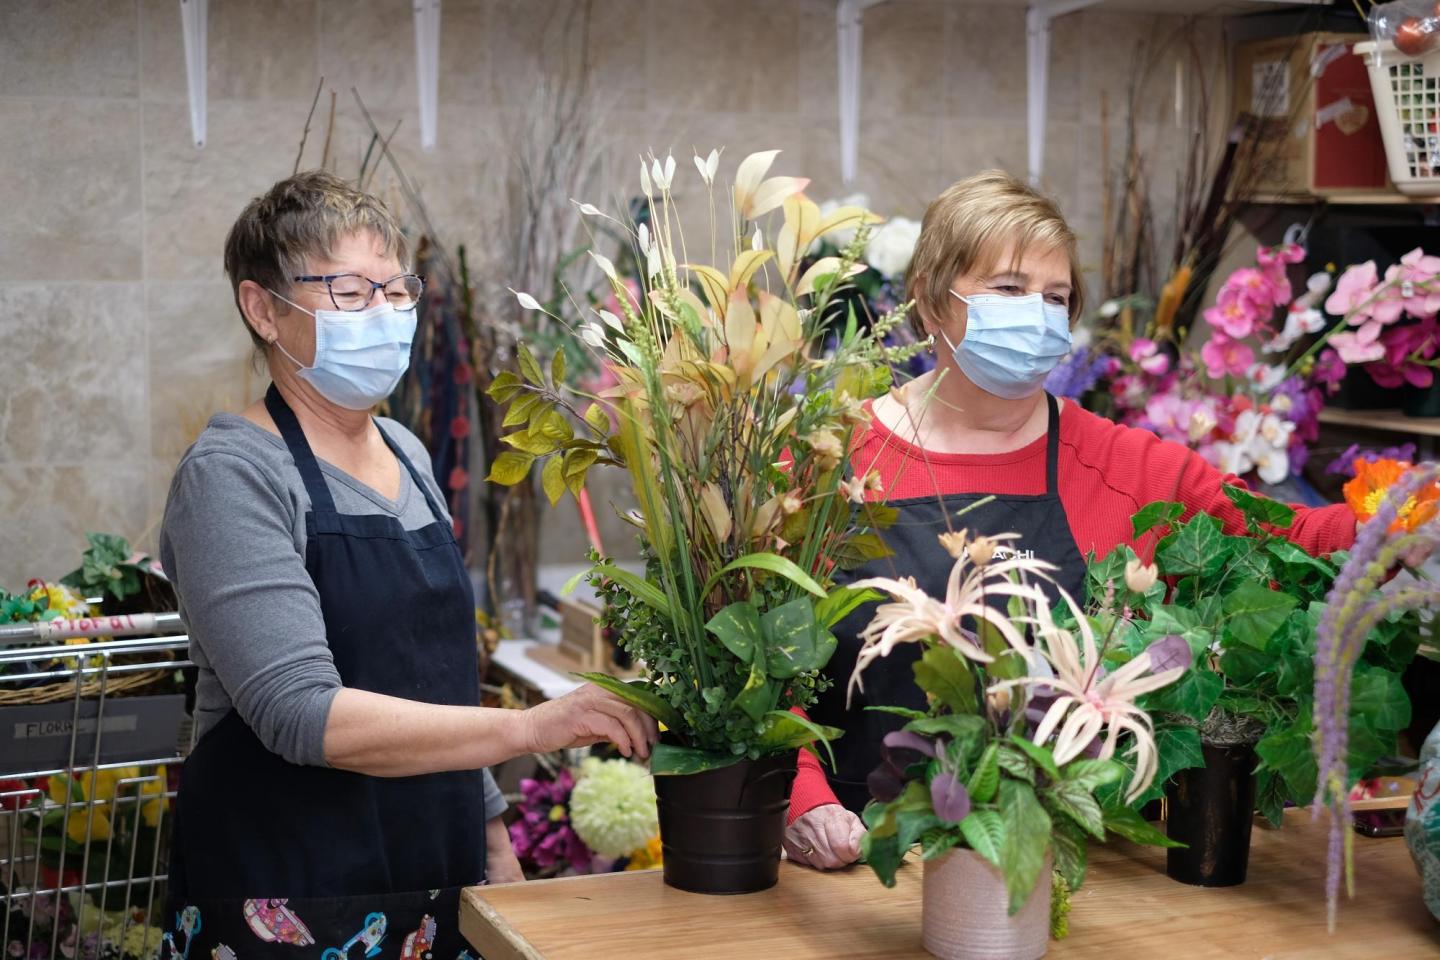 Two women in face masks work with plants in a thrift shop